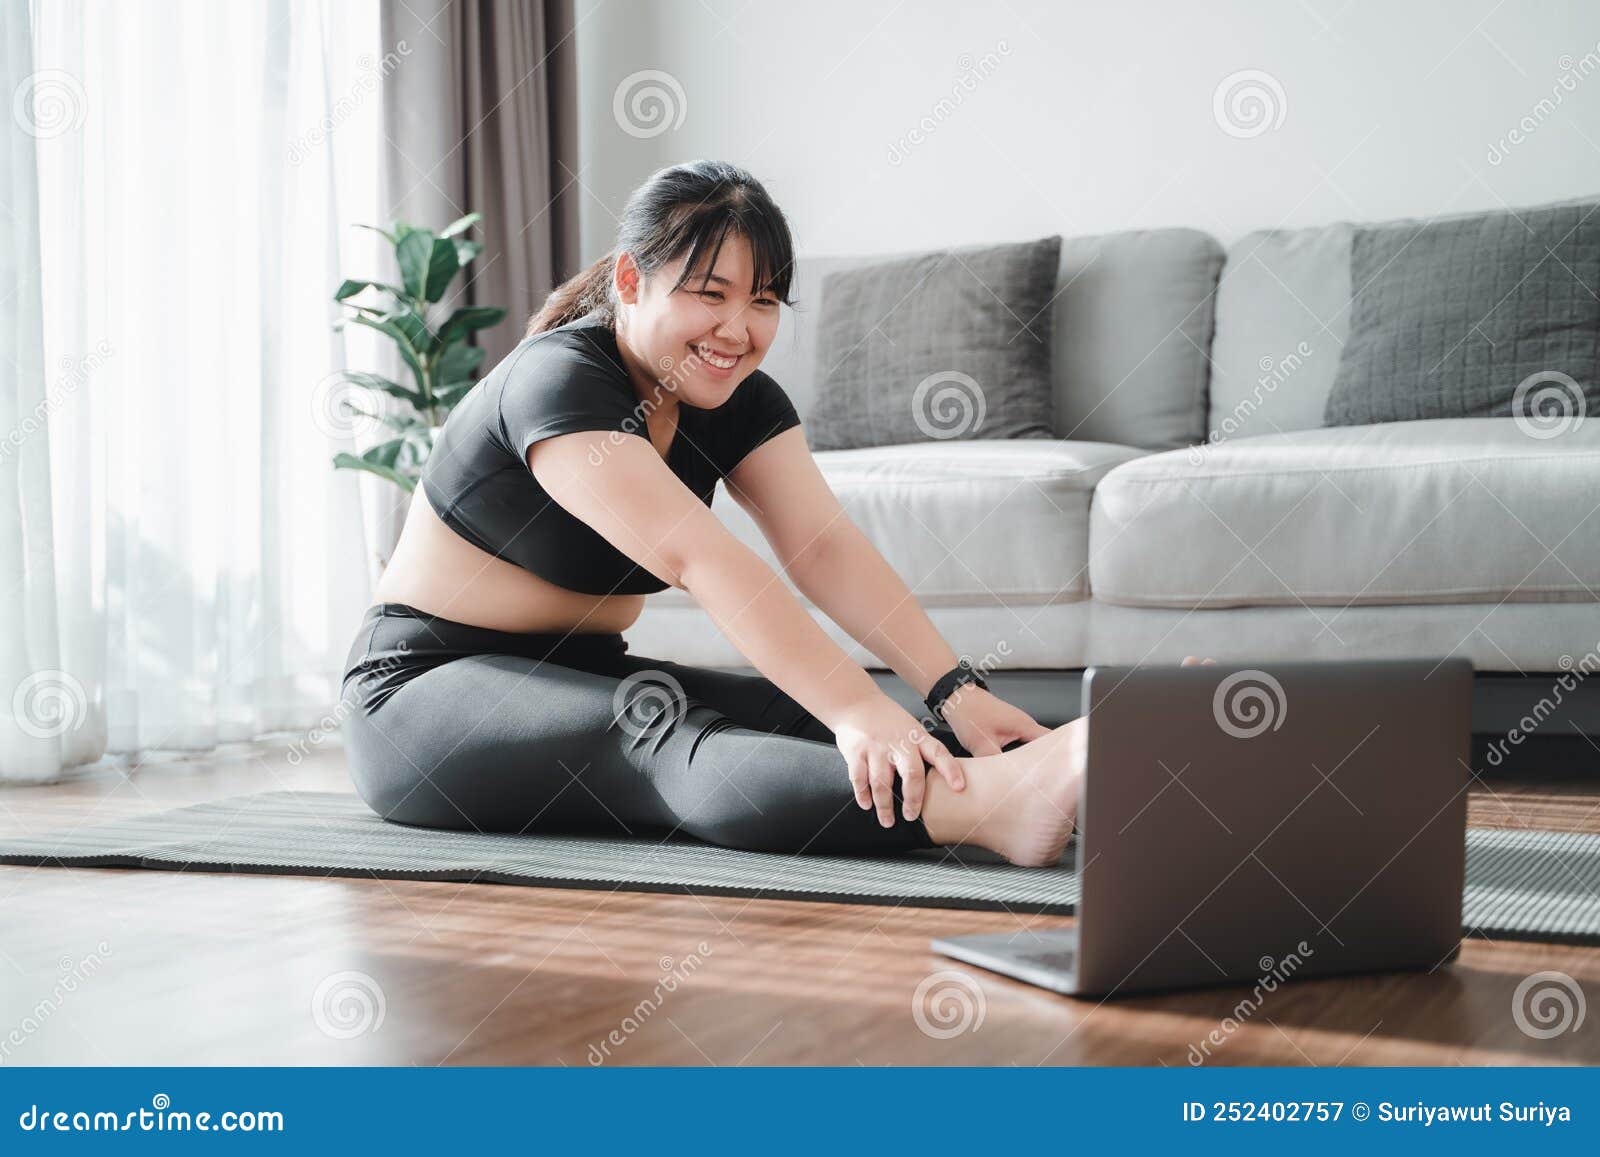 Asian Chubby Woman Sitting on the Floor in Living Room Practice Online ...